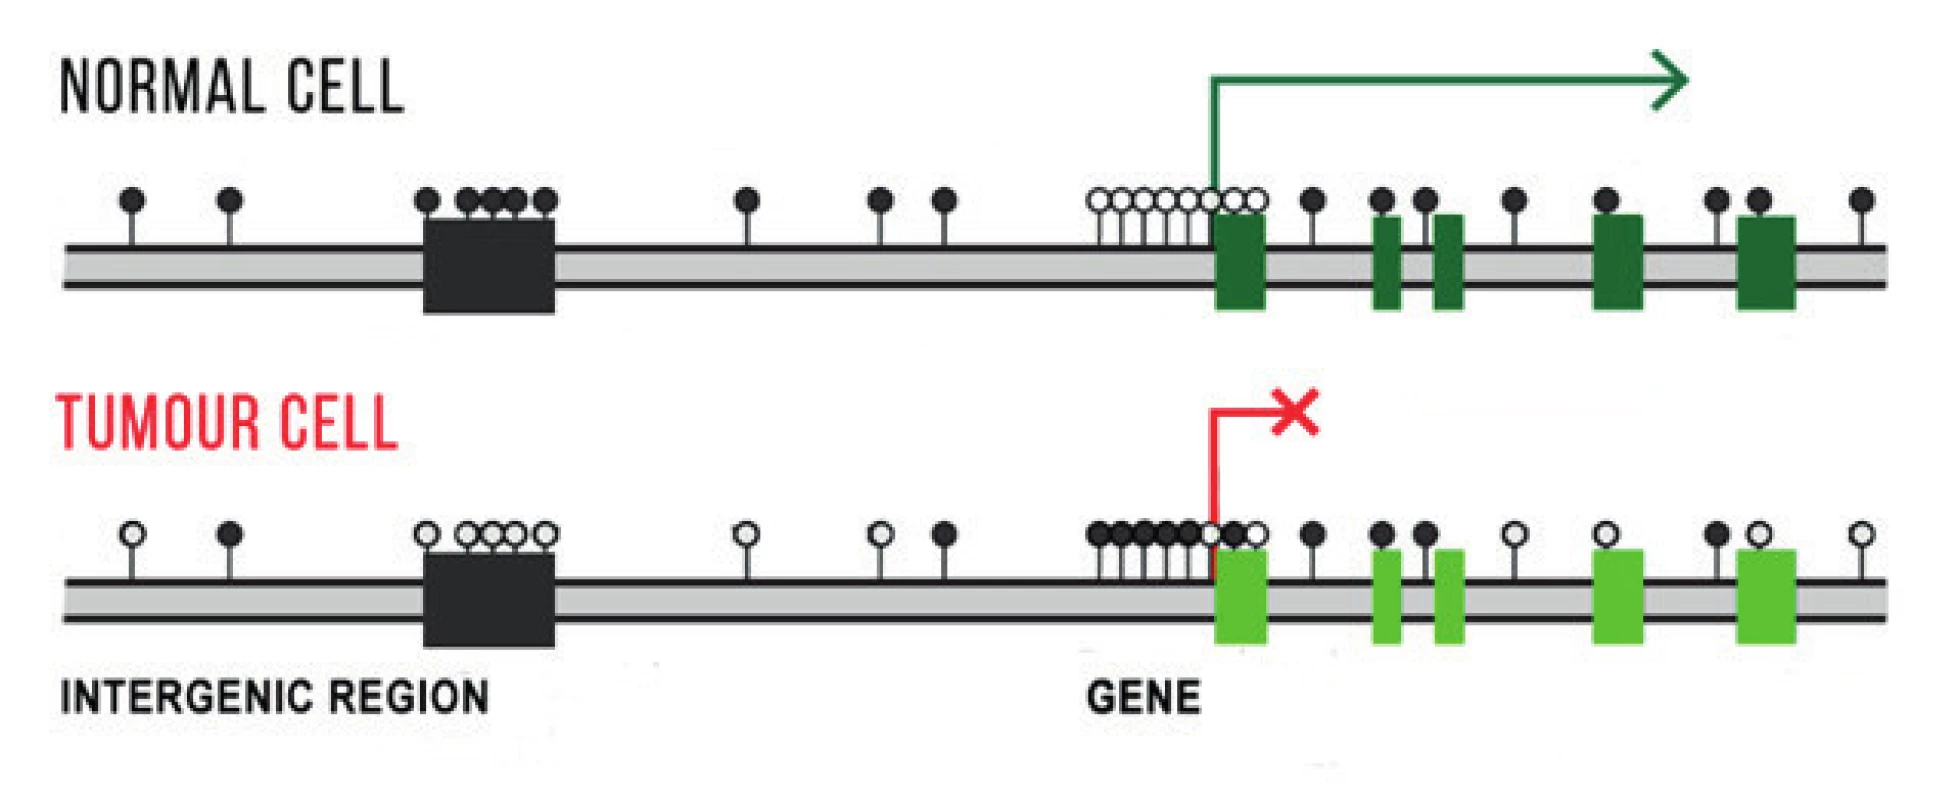  Schematic illustration of differences in DNA methylation in gene promoters,
in extragenetic and intragenetic regions in a normal and tumour cell. Methylation in extragenetic regions protects the cell against chromosome instability, the
tumour cell has a reduced number of methyl groups in this region. Active genes
do not have methylated promoters, unprescribed genes have them hypermethylated. Methylated CpG inucleotides are indicated by a black dot, non-methylated
CpG dinucleotides by a white dot. 